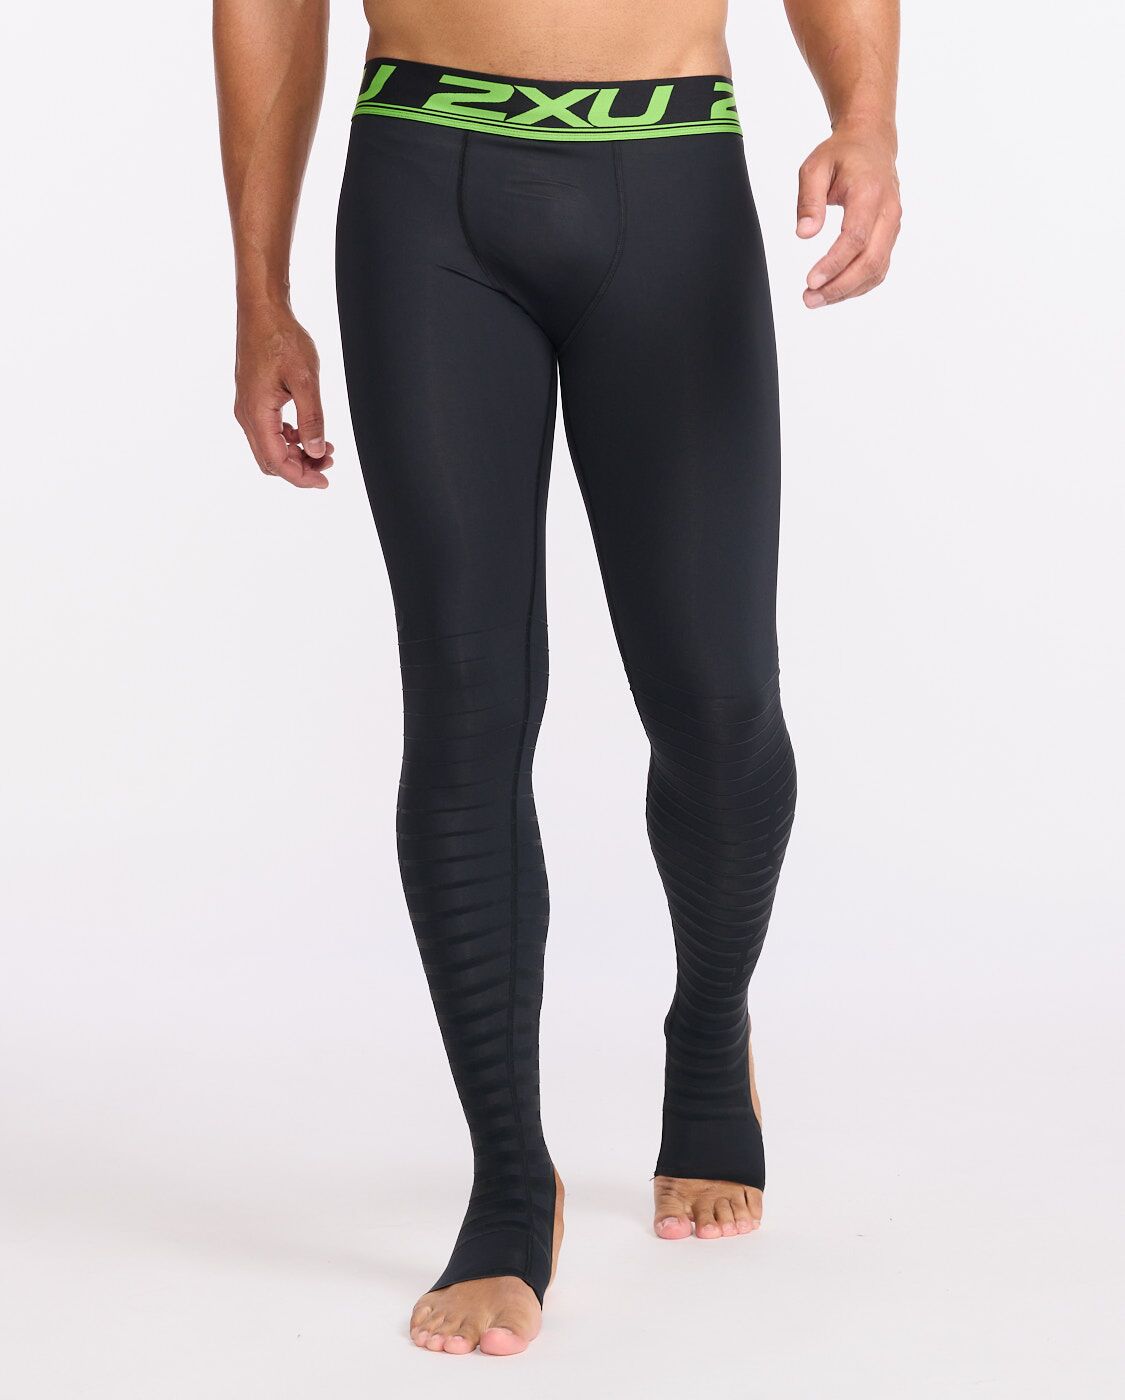 Men's Power Recovery Compression Tights – 2XU US